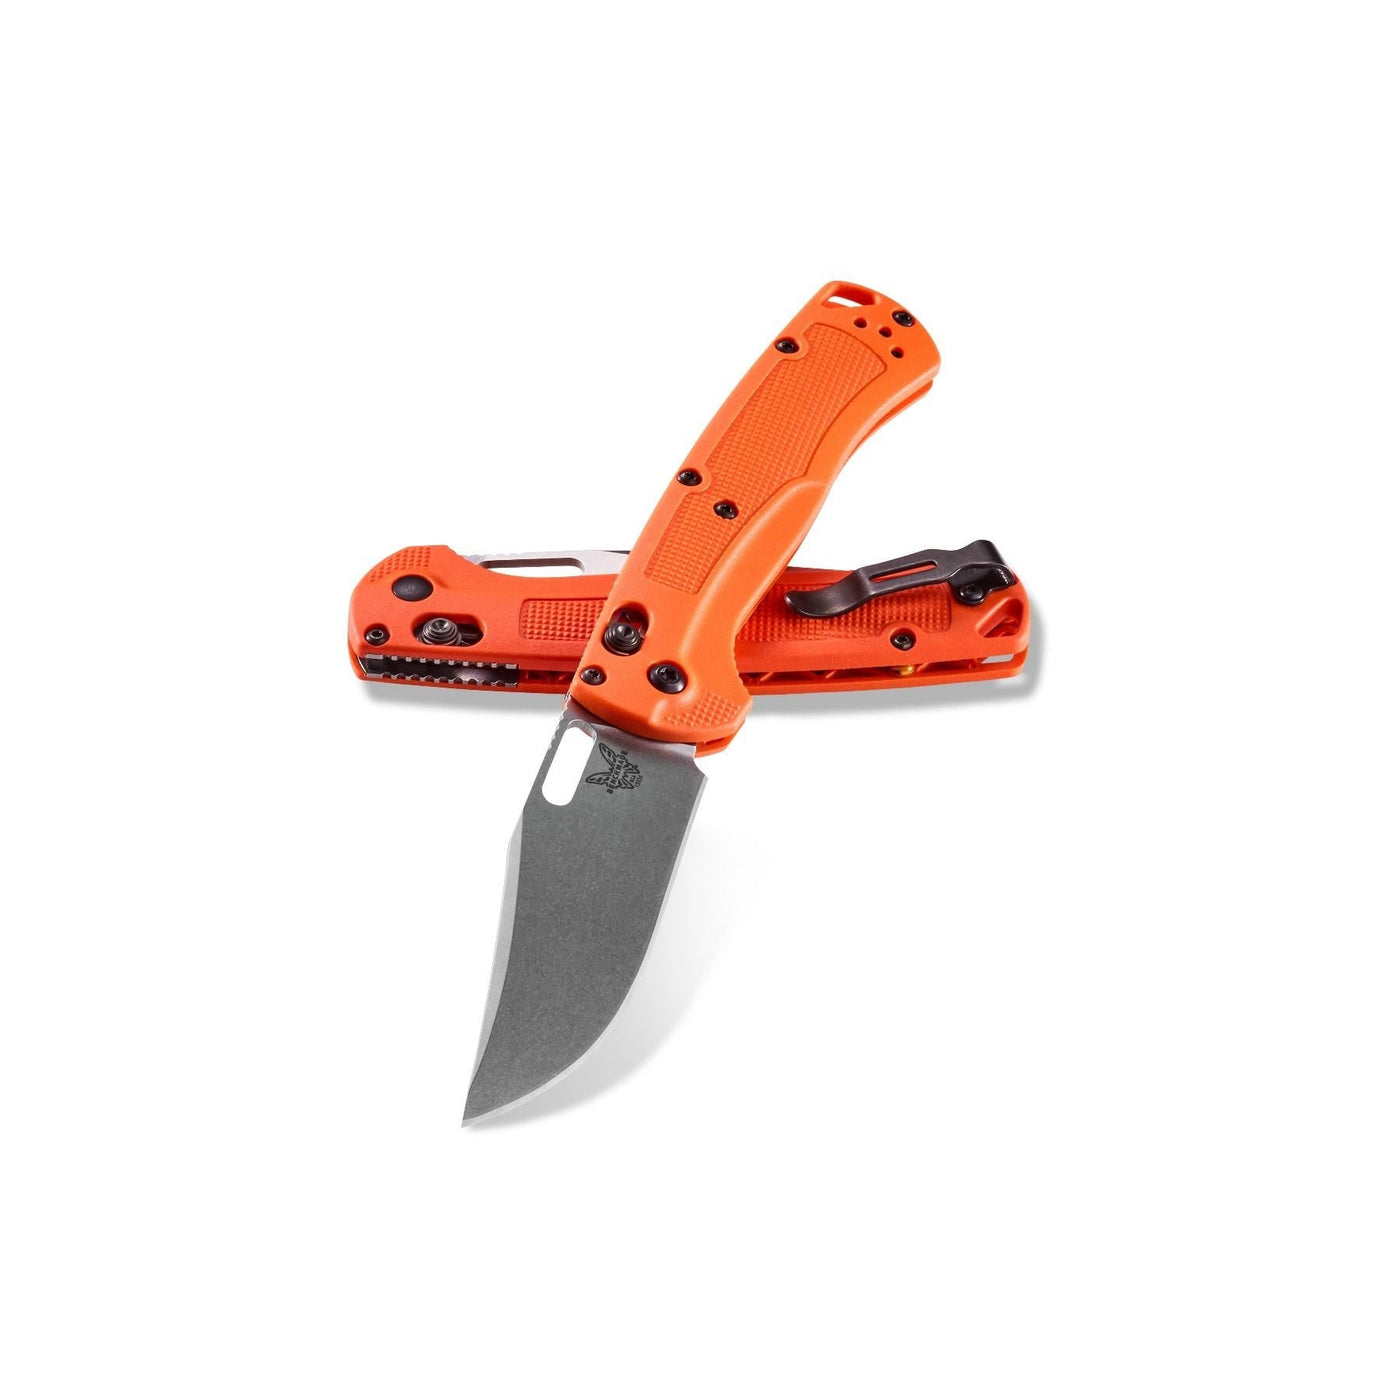 Benchmade Taggedout Knife-Knives & Tools-PLAIN-CLIP-POINT-Kevin's Fine Outdoor Gear & Apparel